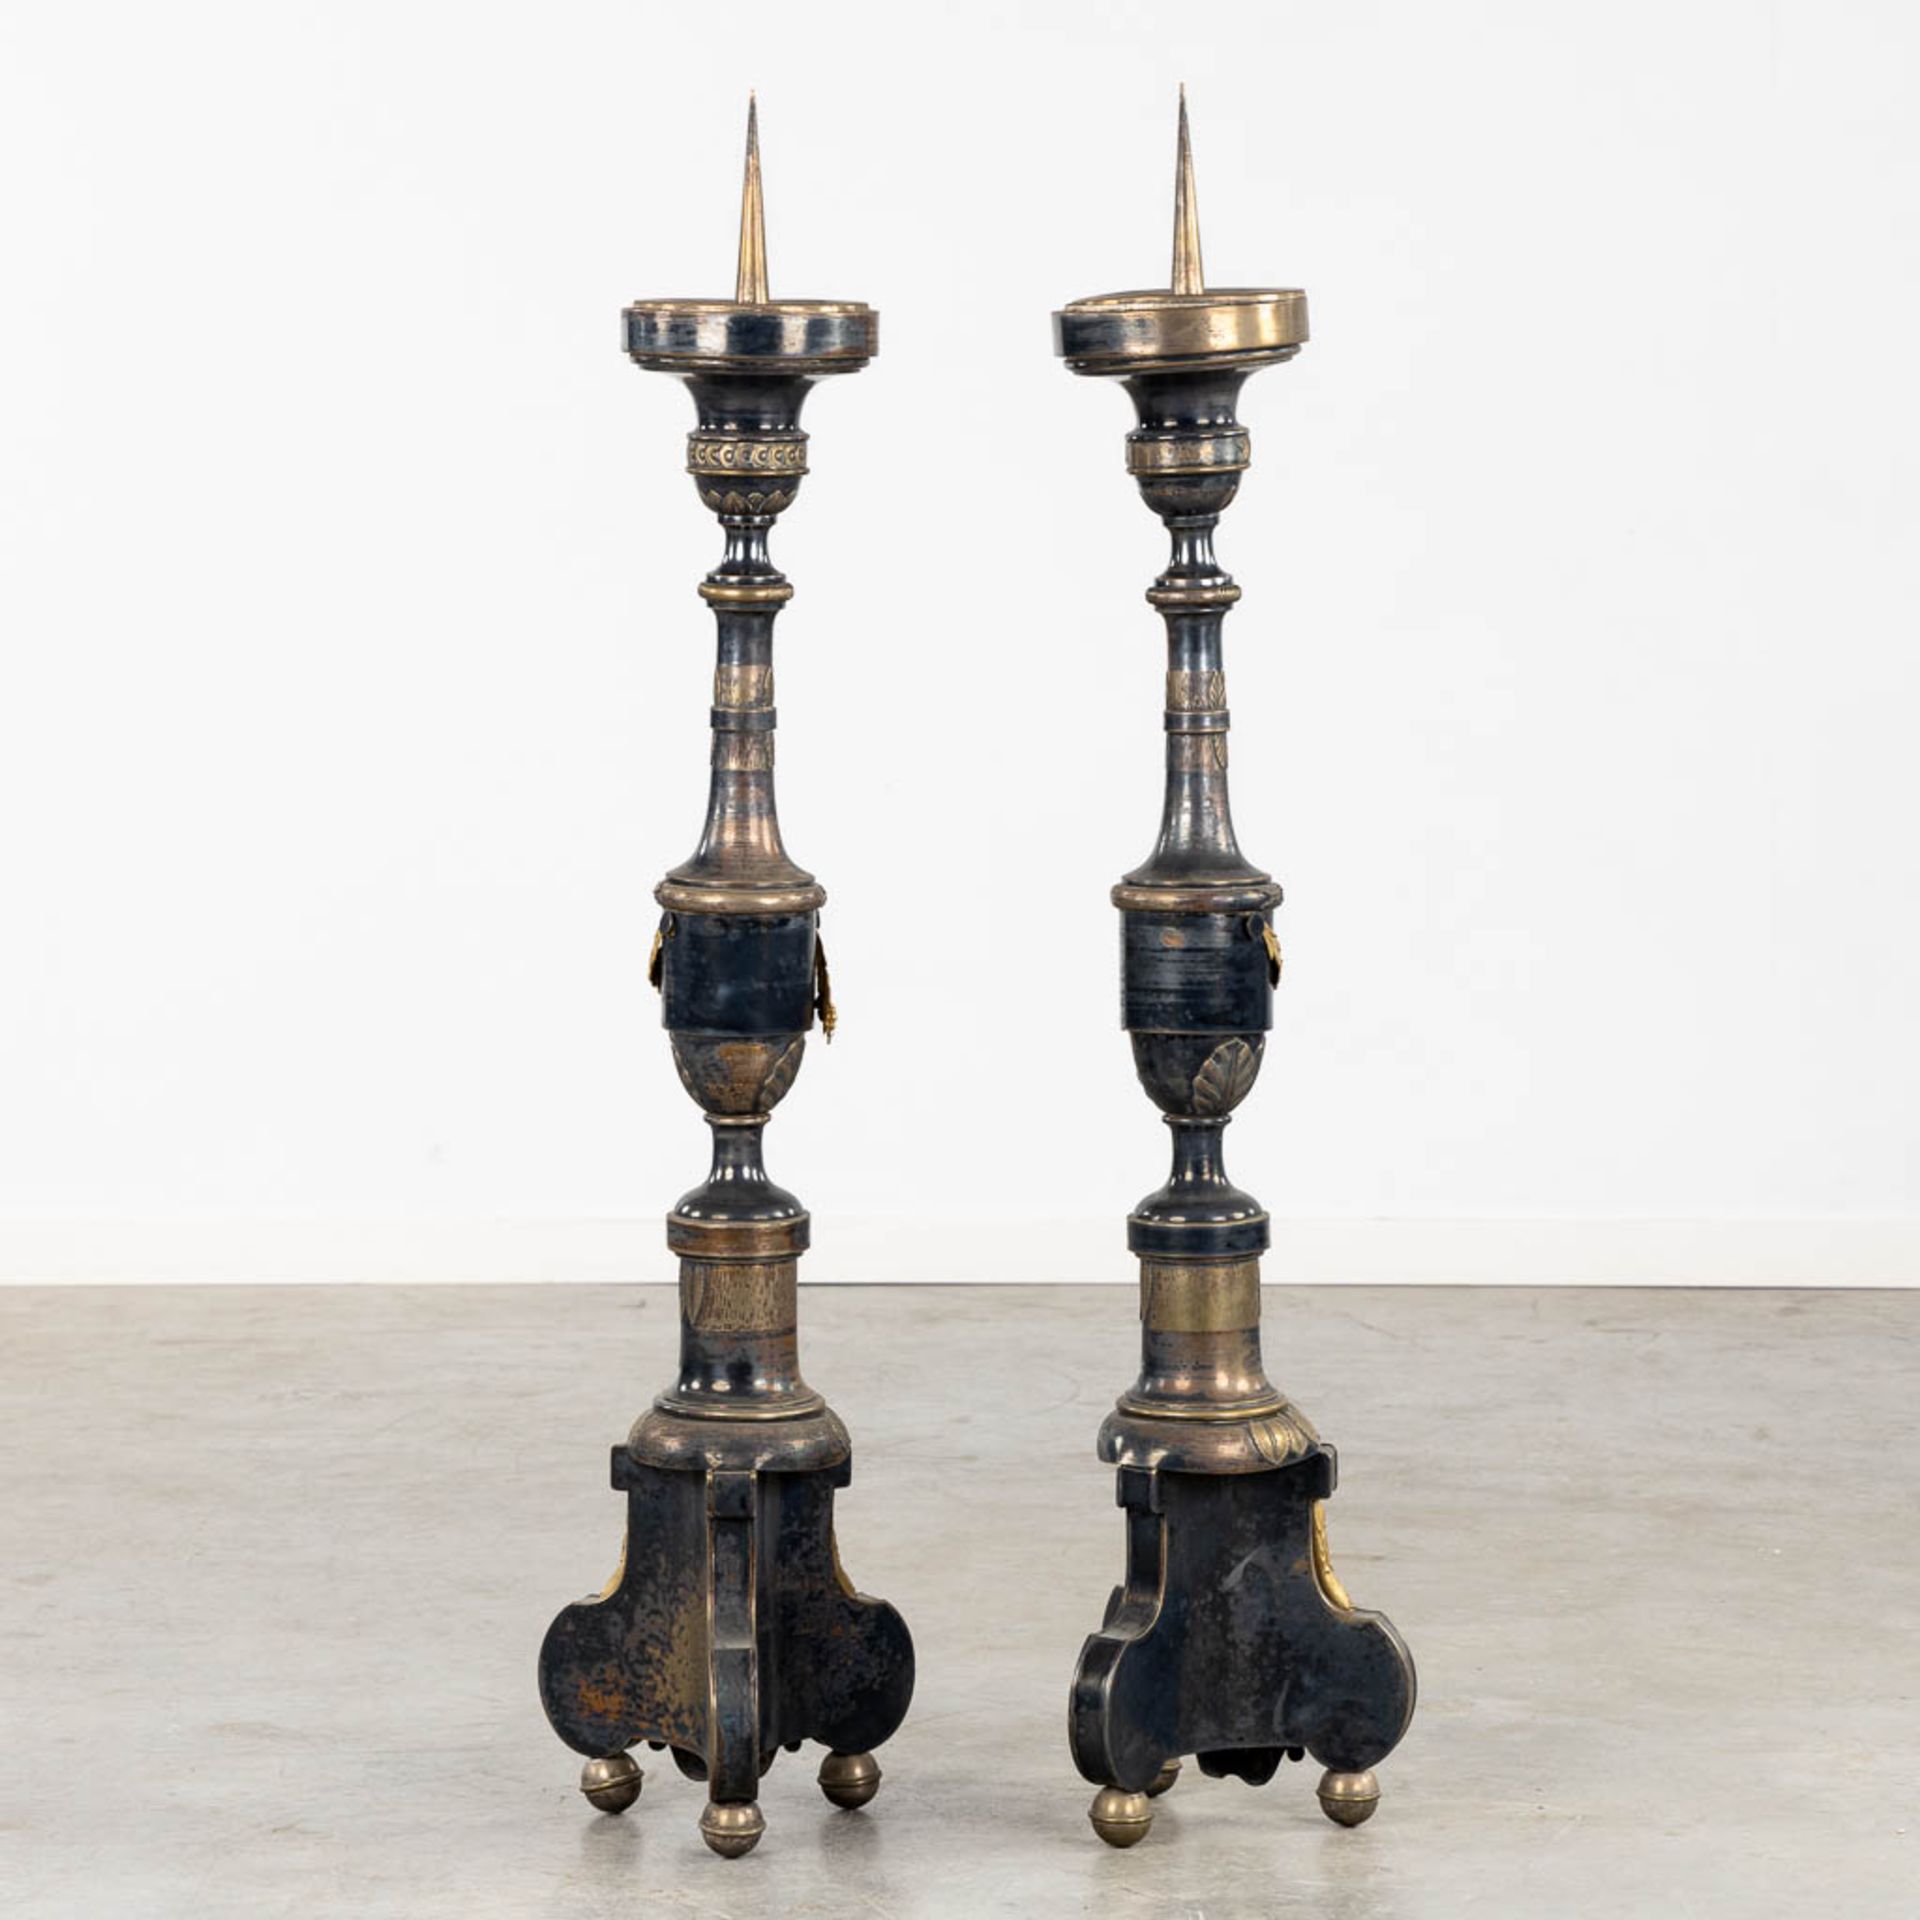 A pair of Church Candlesticks, silver- and gold-plated metal. 19th C. (H:120 cm) - Image 4 of 9